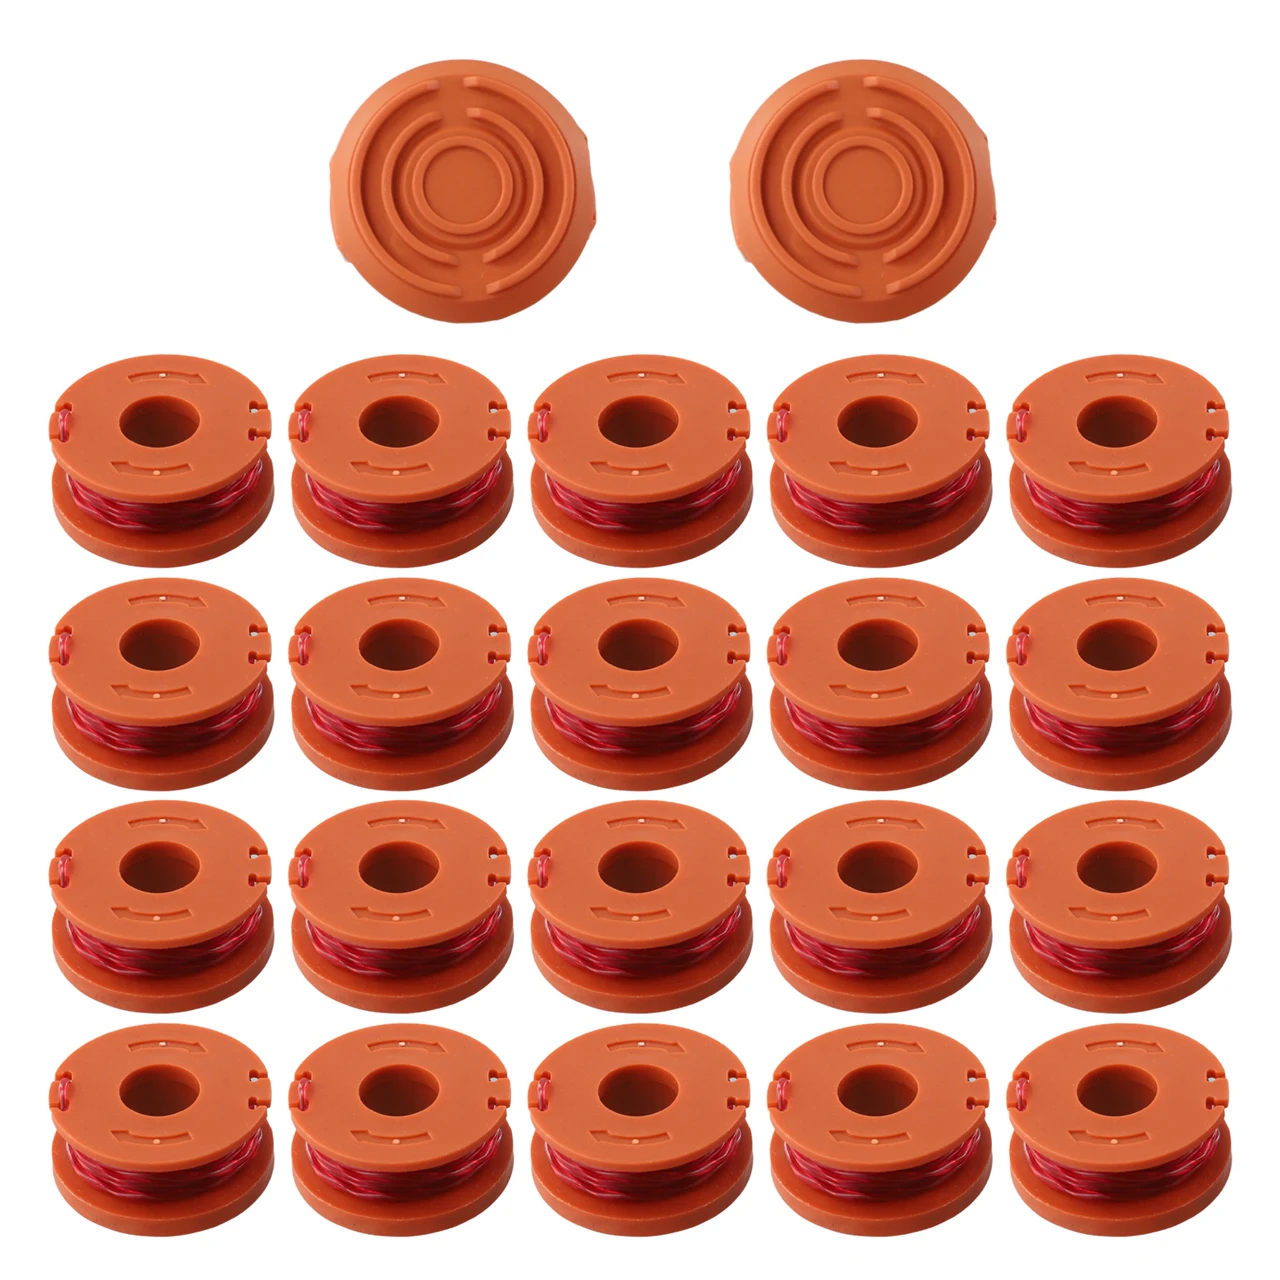 

20*grass String Trimmer Spool 2*cover Line Cap Set Spare Parts For Worx WA0010 WG154 WG163 WG180 Lawn Mower Gardening Tools